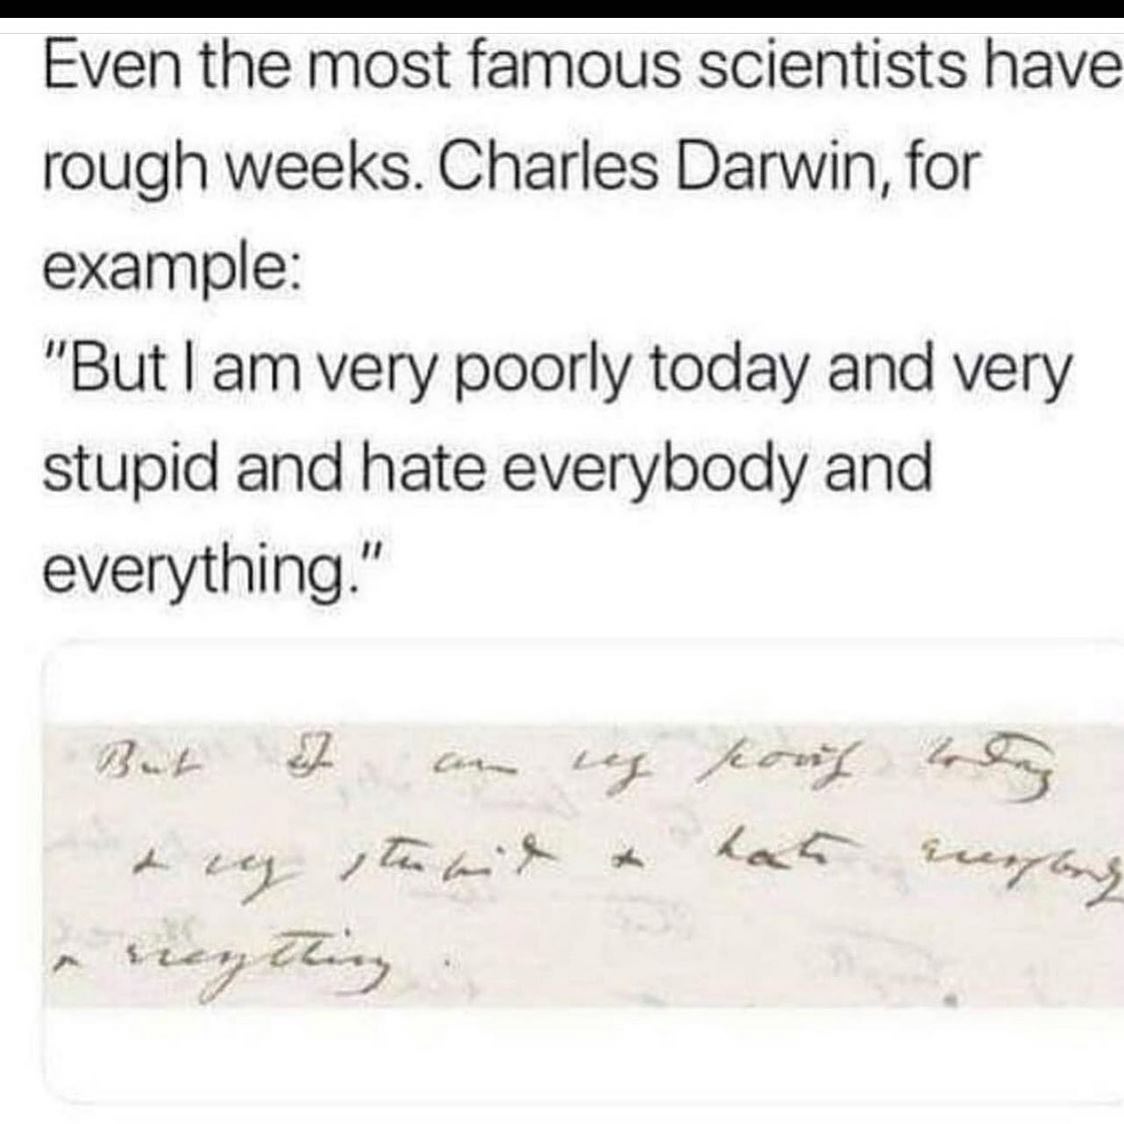 relatable memes - charles darwin i am very poorly today - Even the most famous scientists have rough weeks. Charles Darwin, for example "But I am very poorly today and very stupid and hate everybody and everything." Jz A ry rreything. an ses pois terdeng 